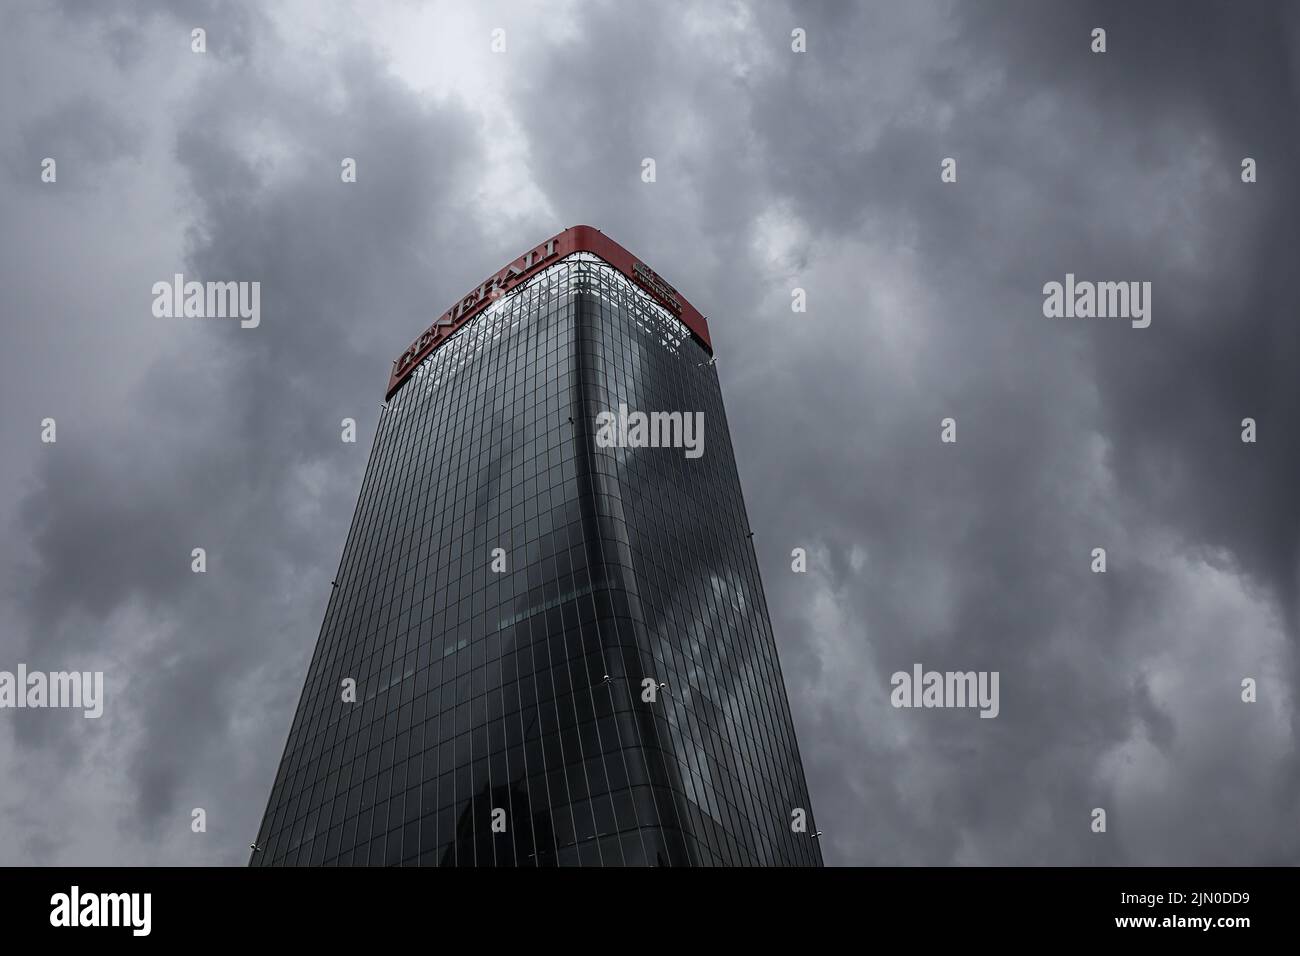 Milan, Italy - June 26, 2022: Generali Tower with Cloudy Sky in CityLife. Modern Skyscraper in Tre Torri. Dramatic Below View of Architecture in Milan Stock Photo